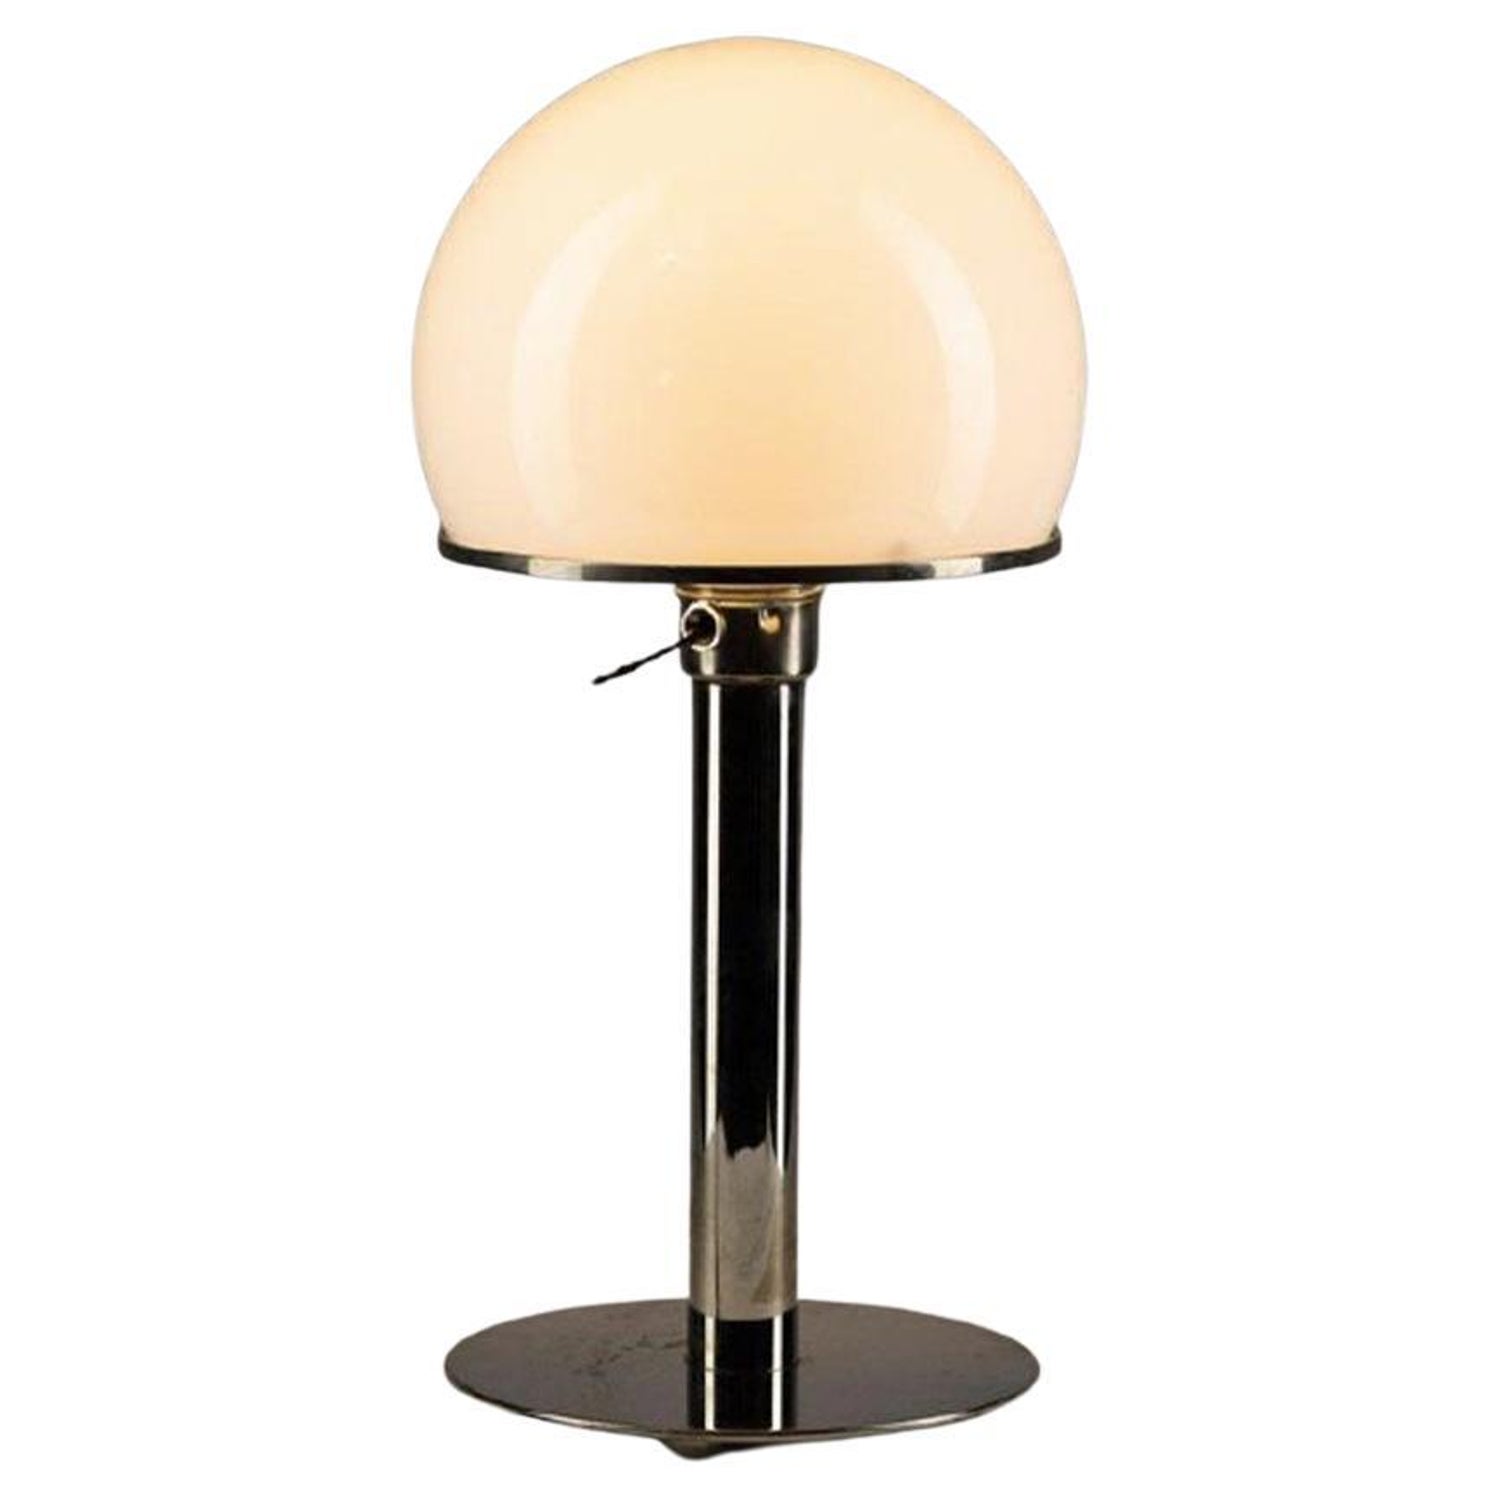 Wilhelm Wagenfeld, 'Wg 24' Table Lamp For Sale at 1stDibs